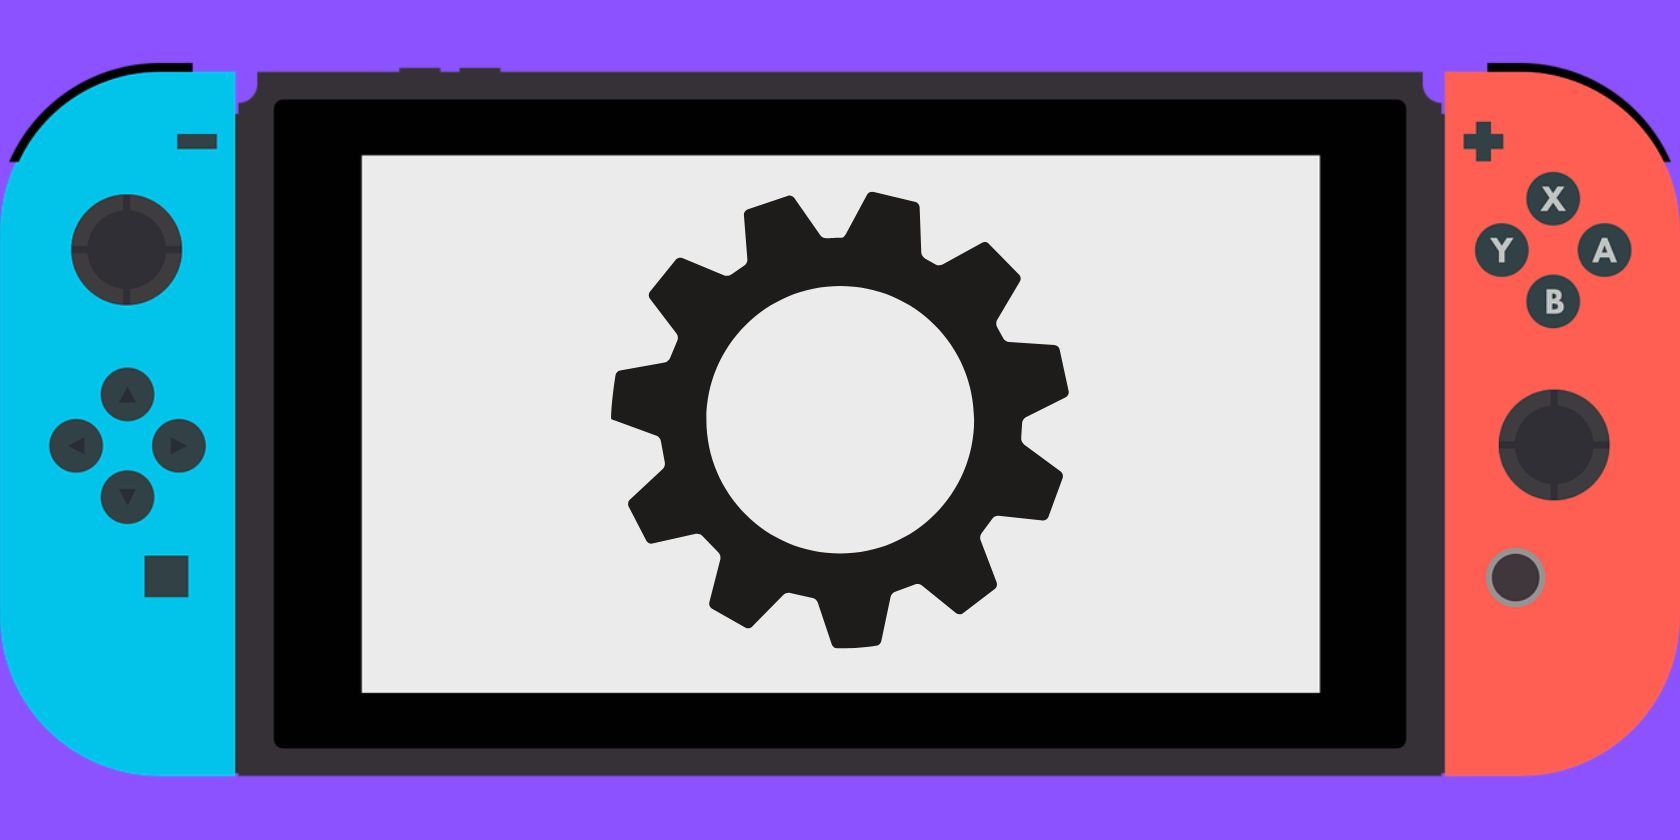 A vector of Nintendo Switch with a vector of a cog in the screen